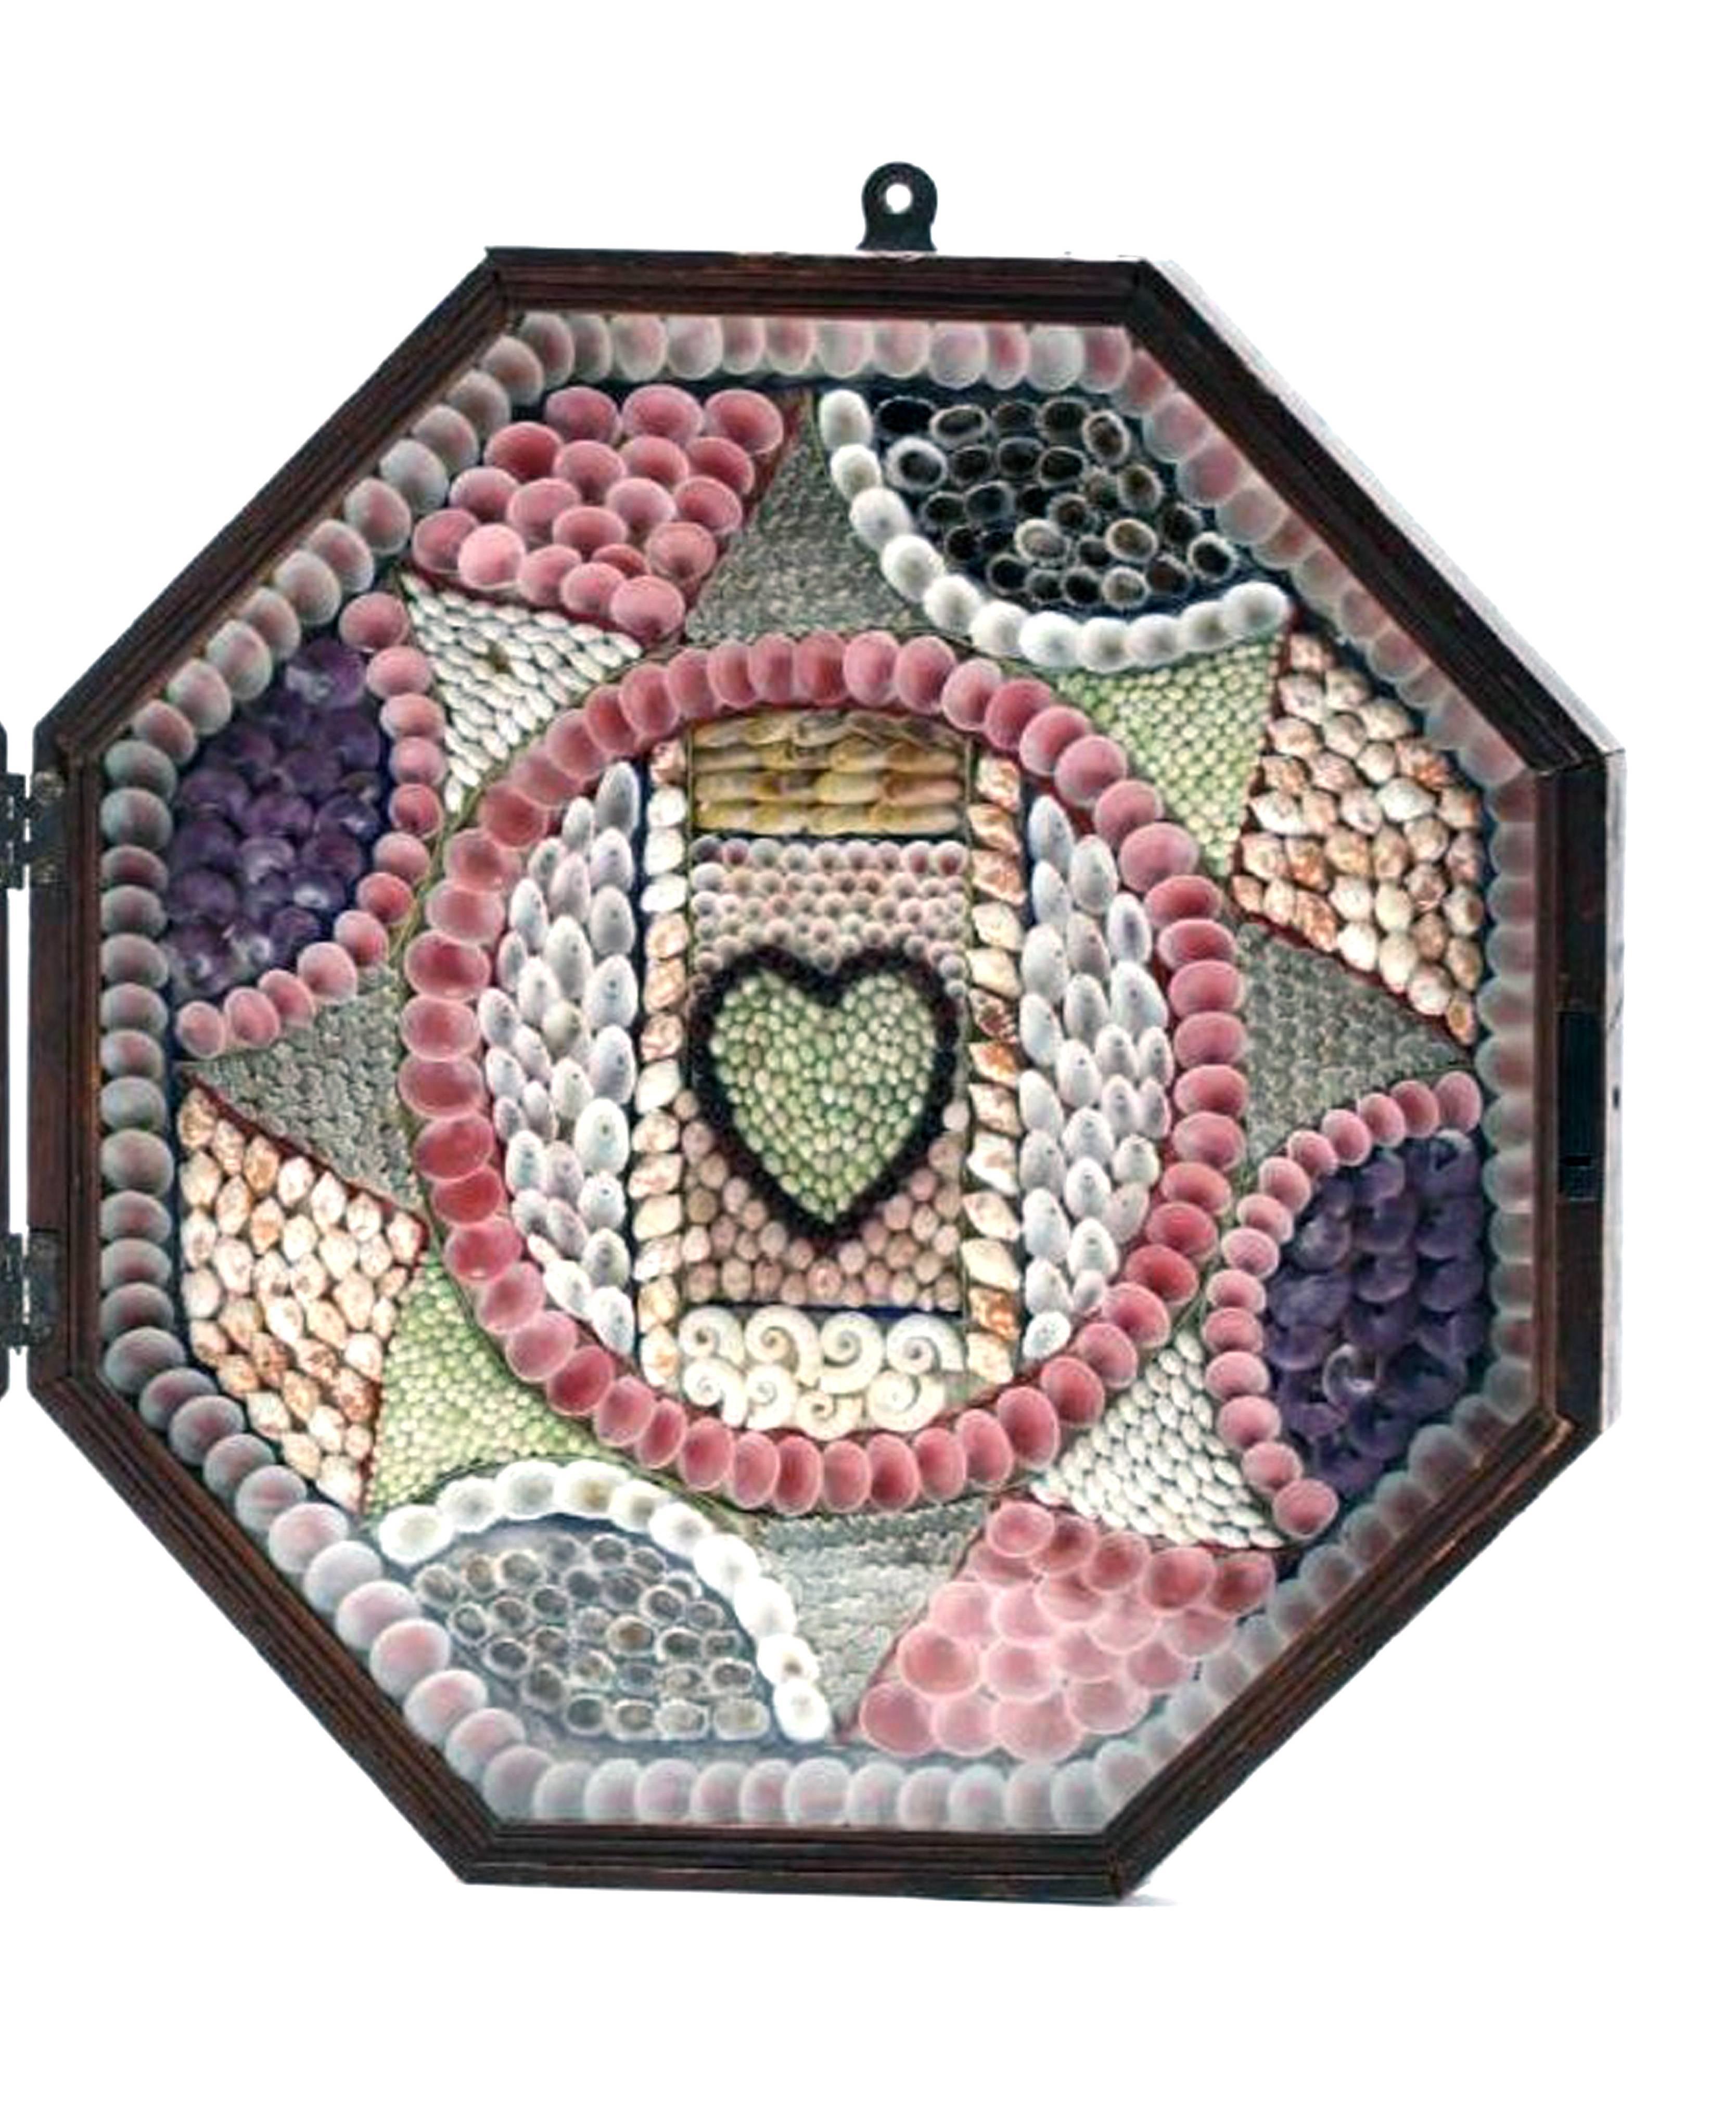 Large double sailor's valentine, Barbados,
circa 1885.

A large double sailor's valentine with one side with an anchor and the other side with a heart surrounded by arrays of sea shells within a mahogany box.

Dimensions: 28 inches wide x 14